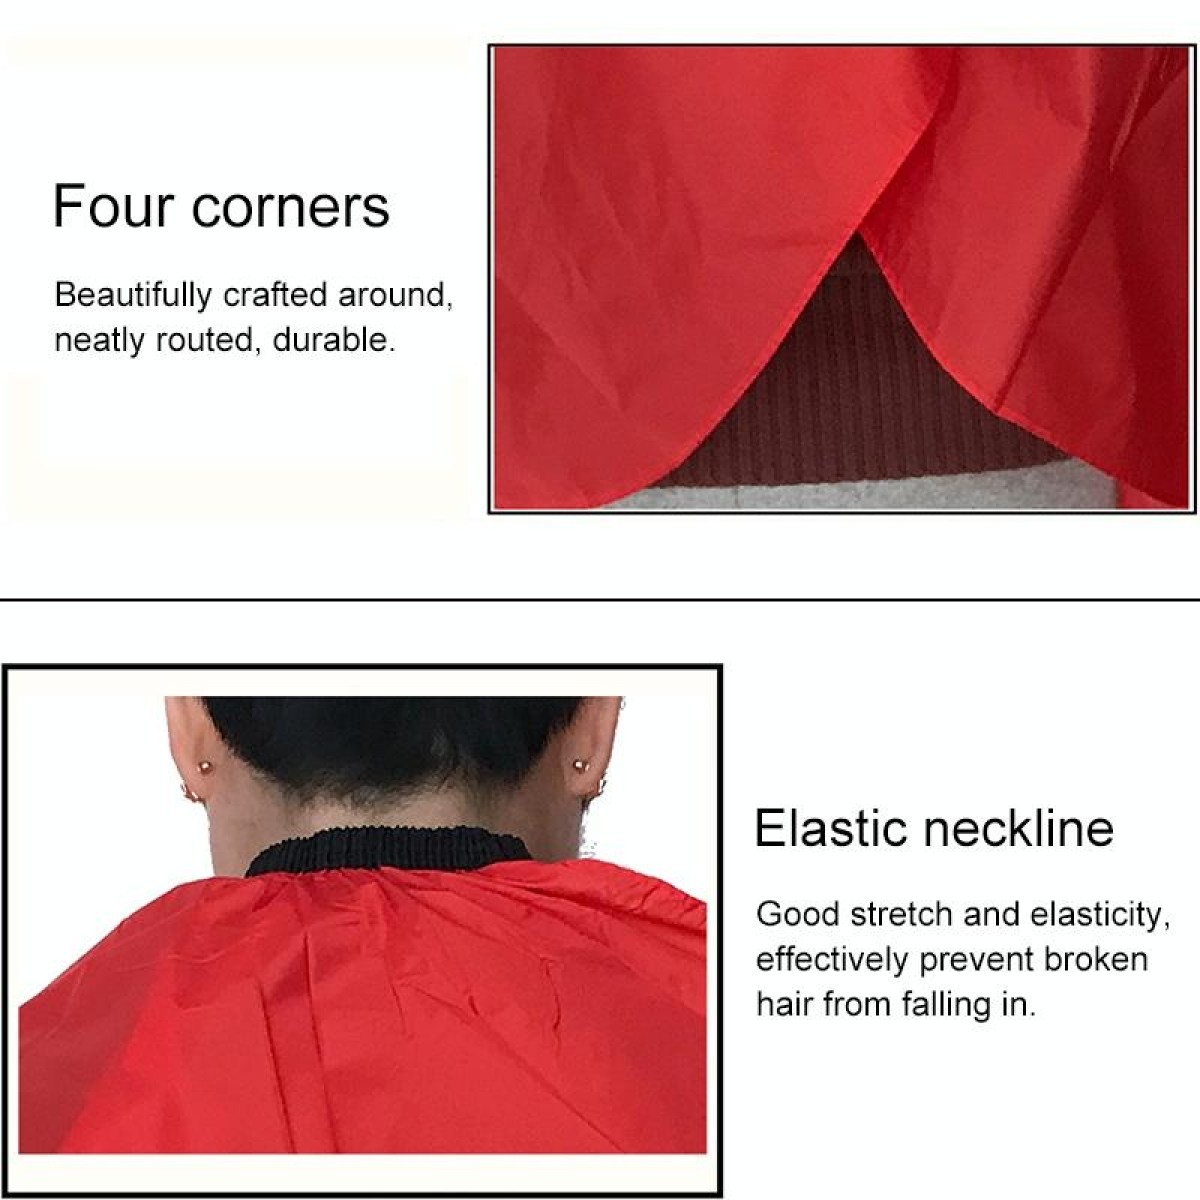 Hair Salons Waterproof Cloth Adult Haircut Hair-coloring Shaved Cloth Apron in Random Delivery